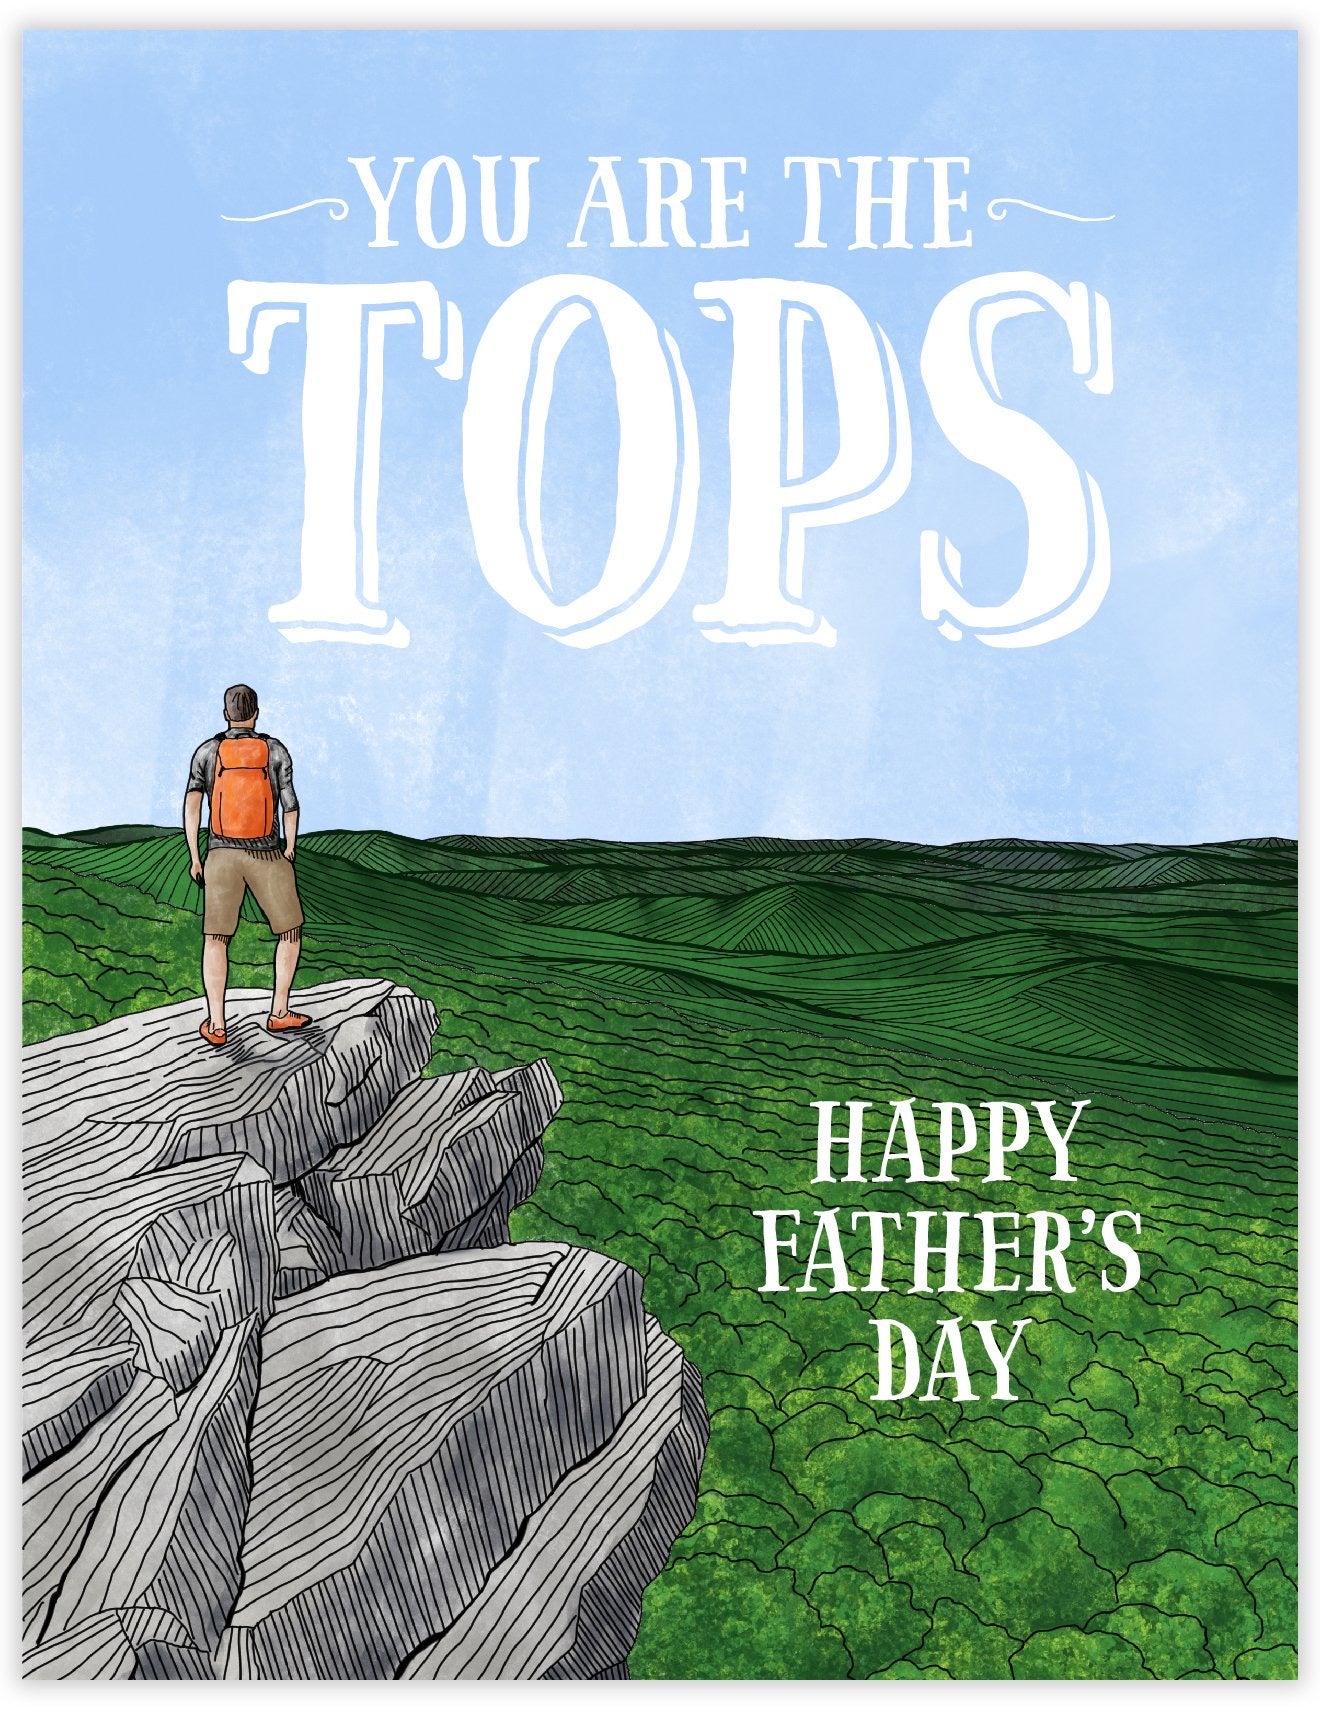 Happy Fathers day greeting card